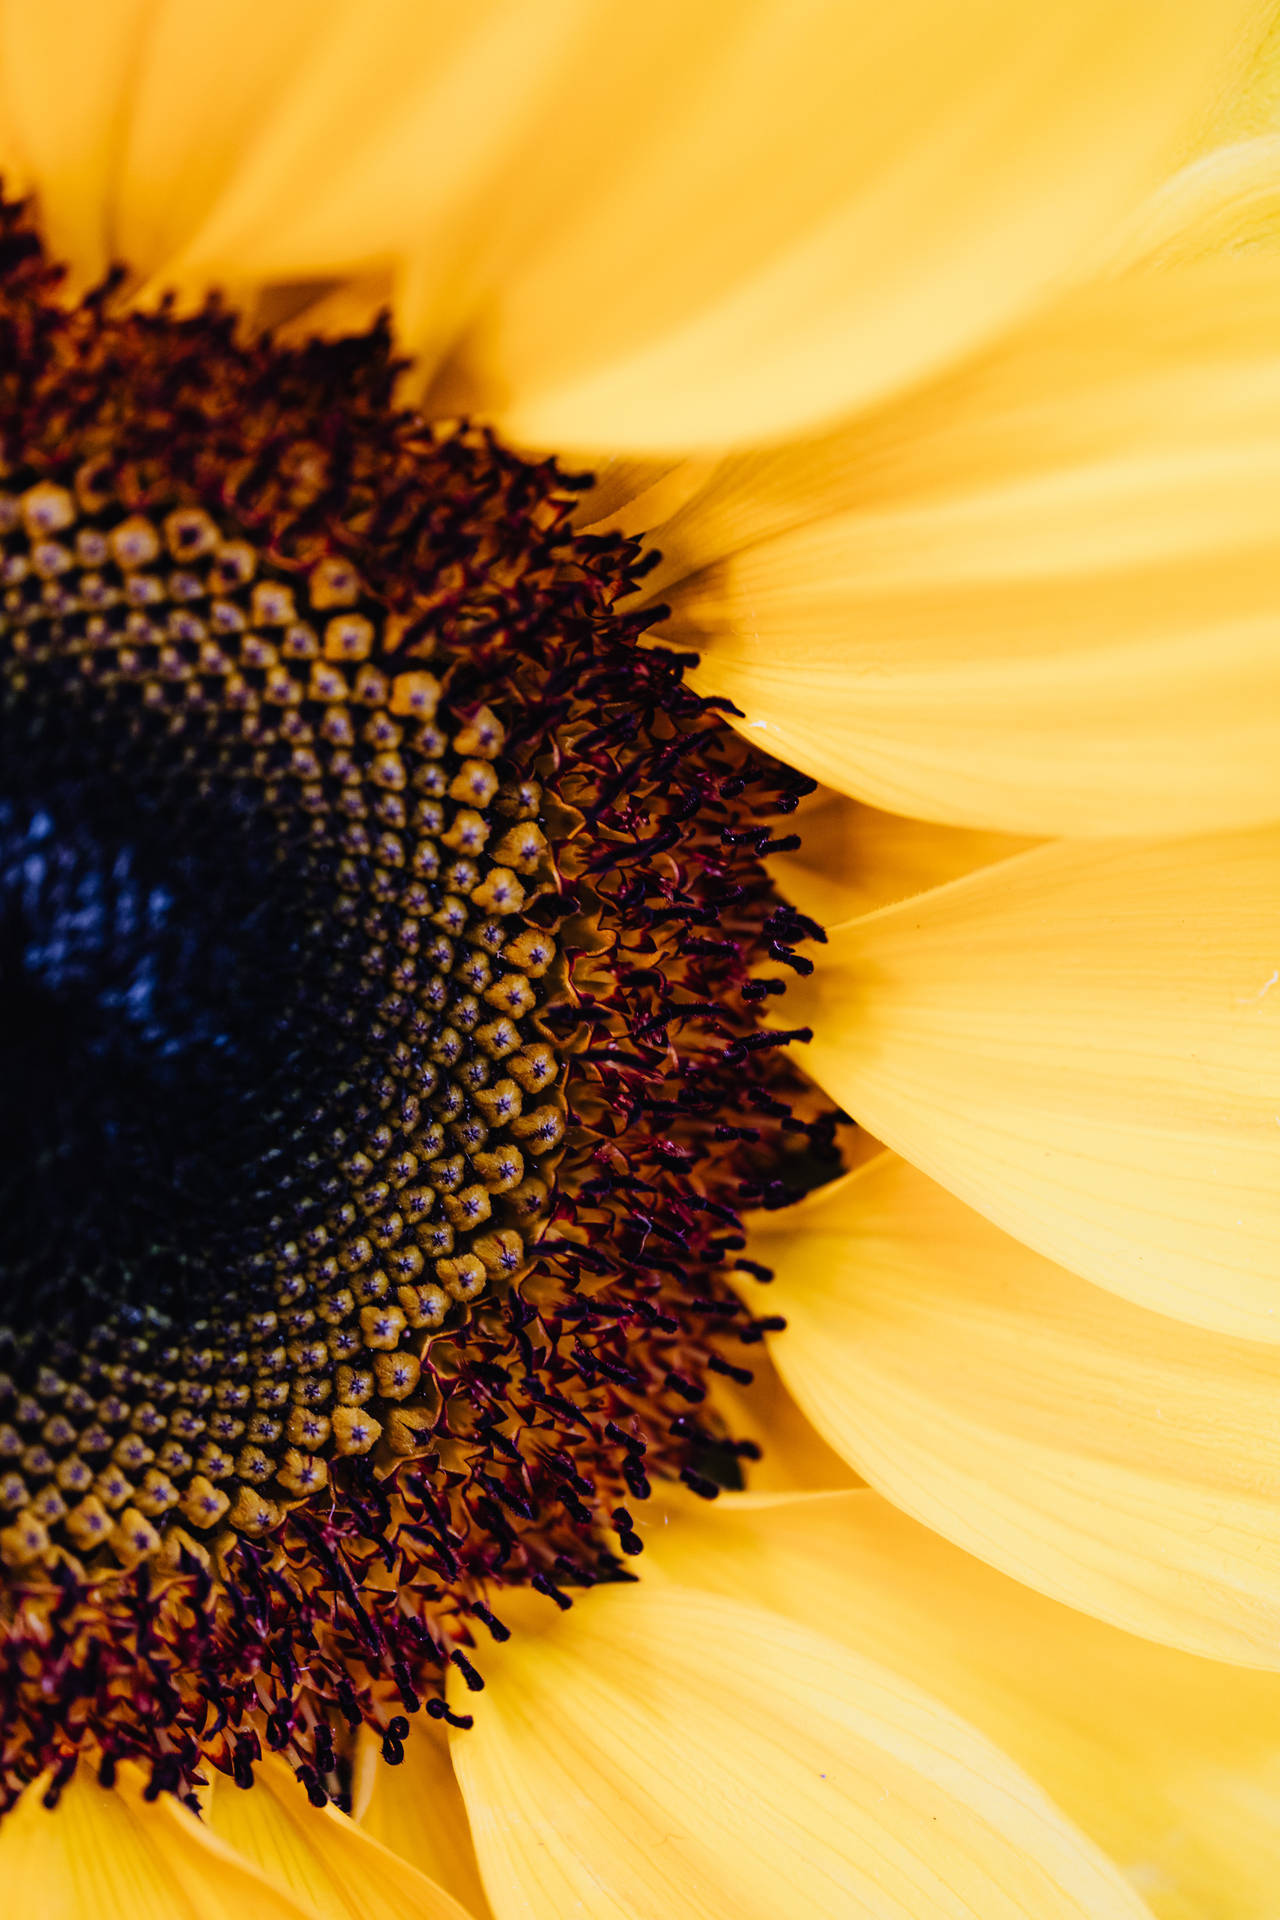 Evening Splendor - Iphone 11 Pro Max With A Stunning Sunflower Backdrop In 4k Background